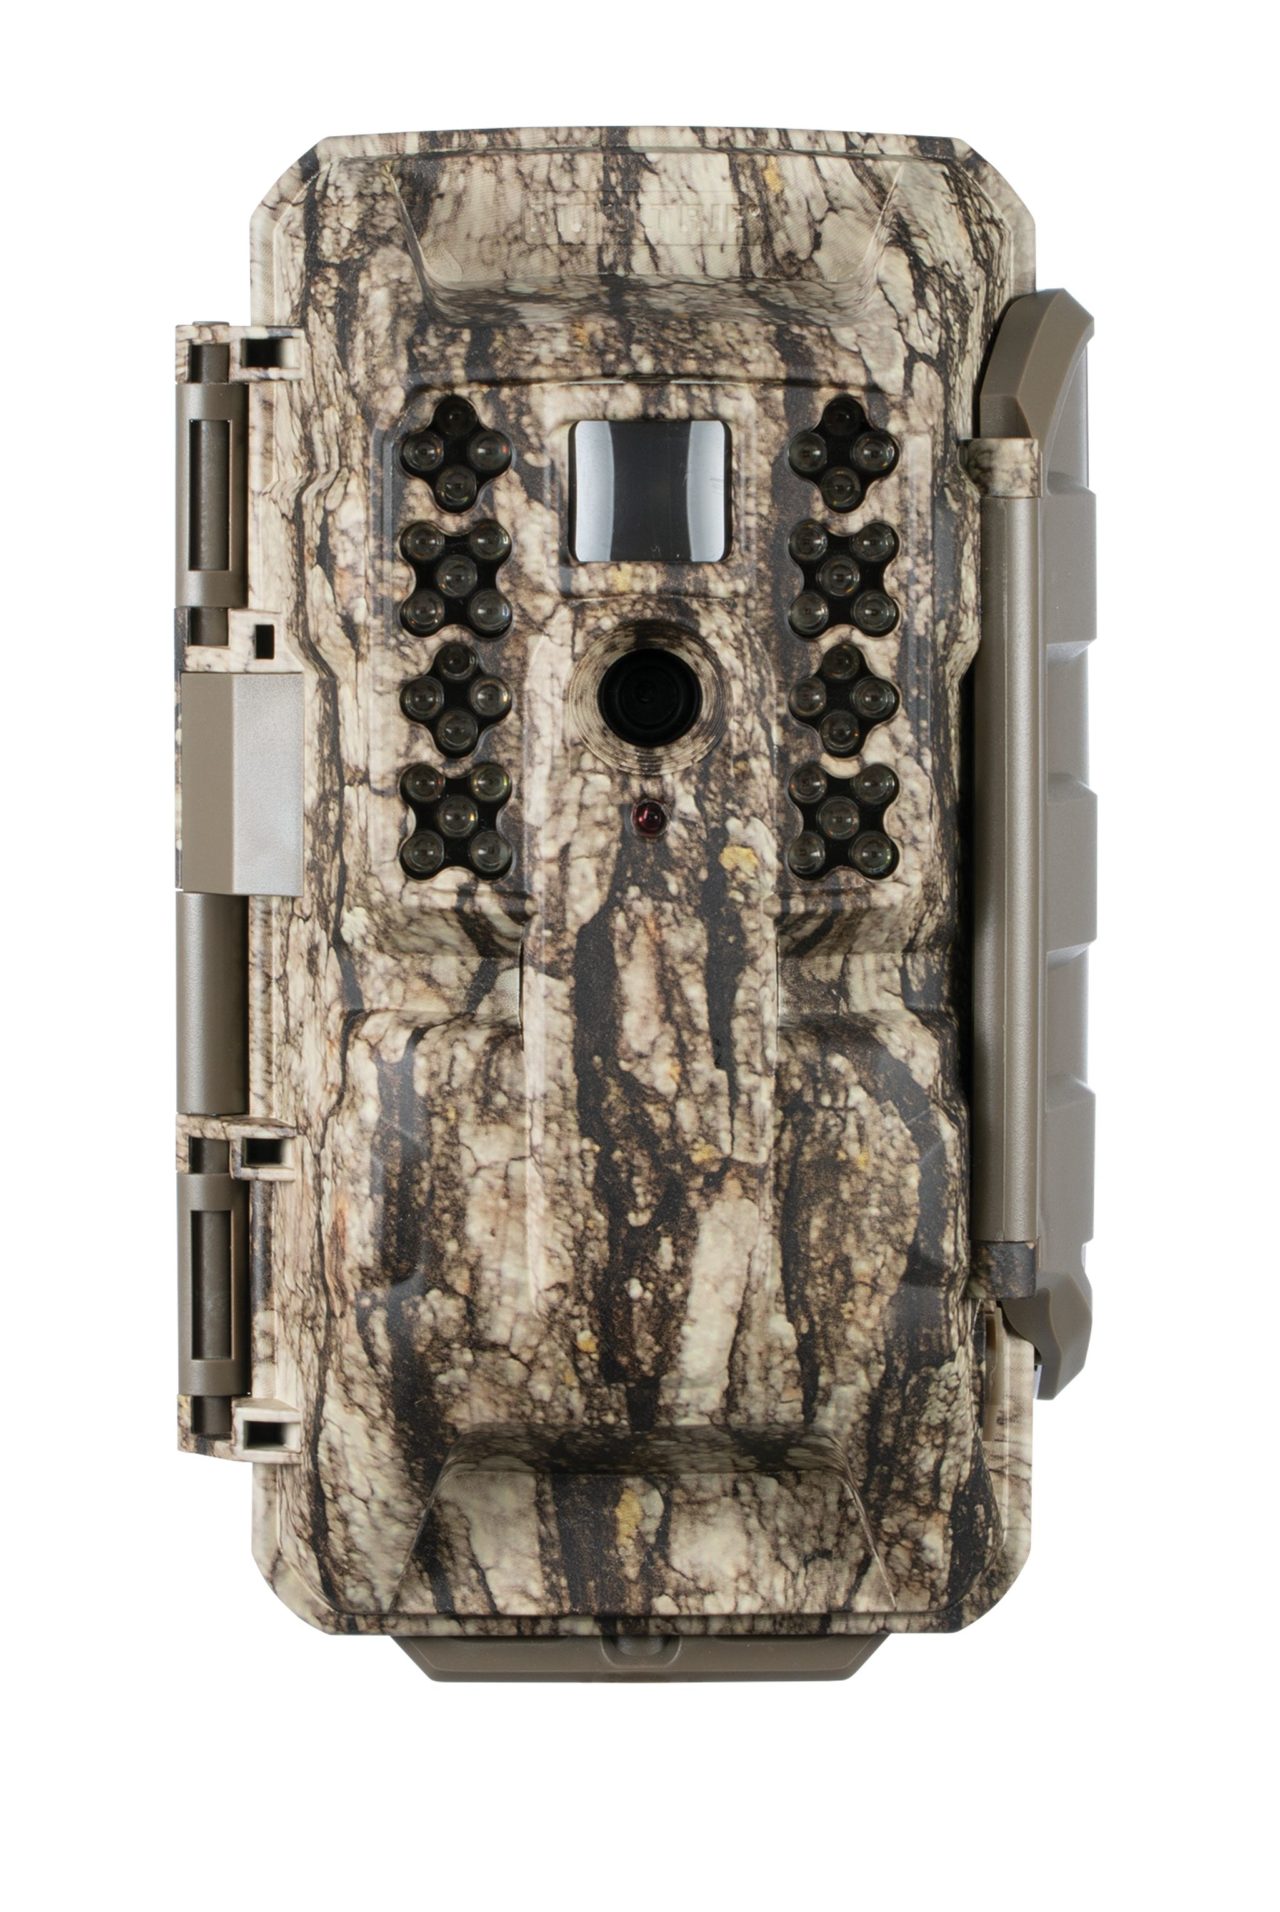 Moultrie Mobile Unveils New Integrated Cellular Game Cameras